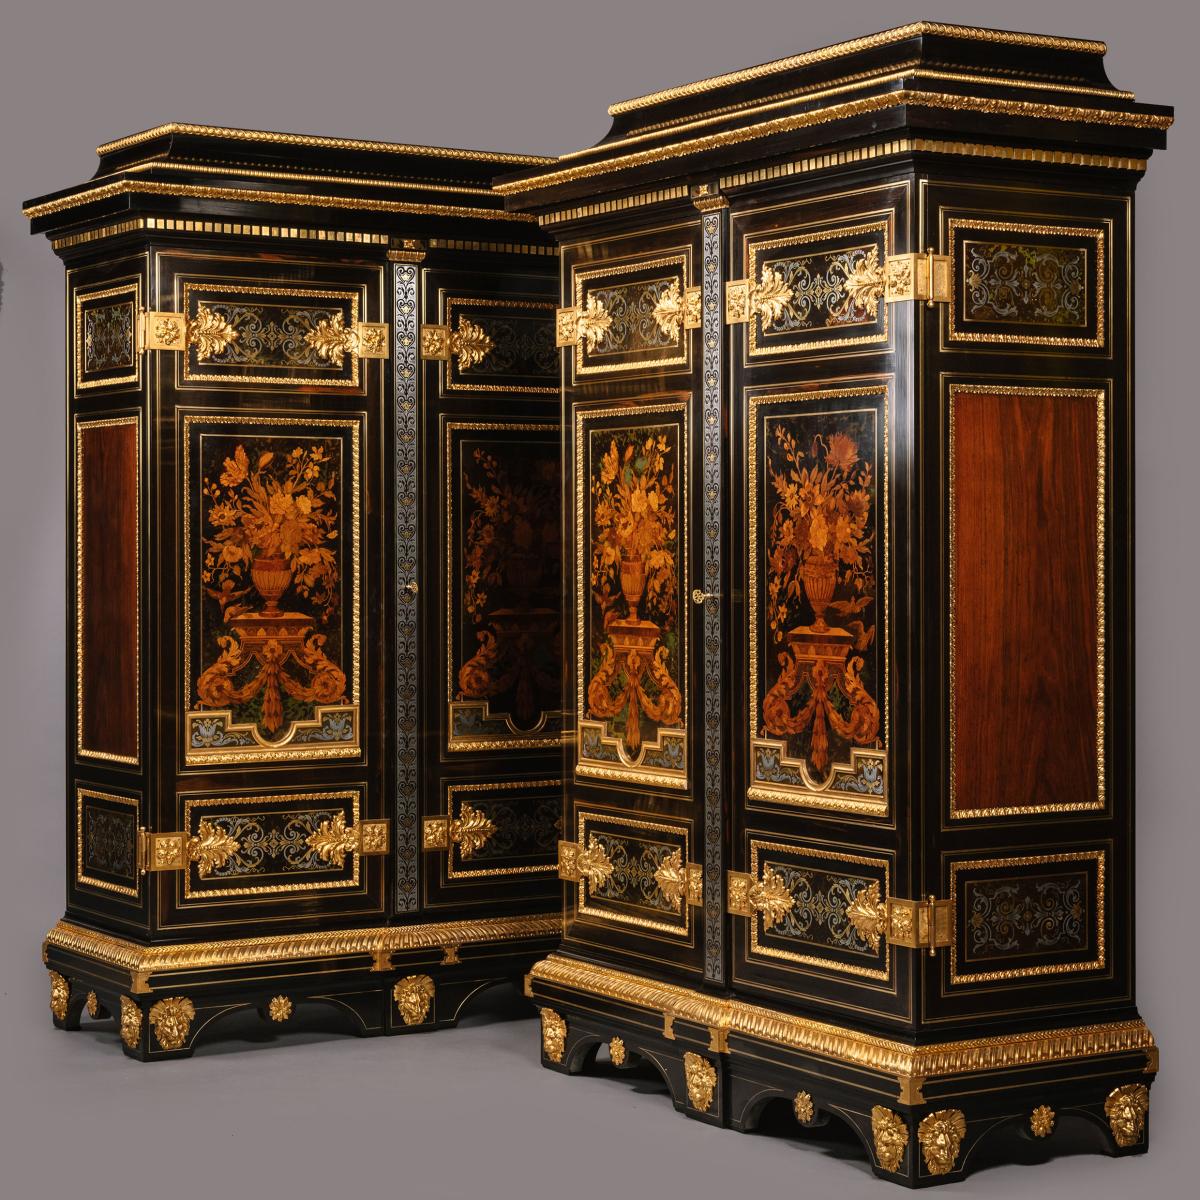 Marquetry Armoires After The Celebrated Model by André-Charles Boulle